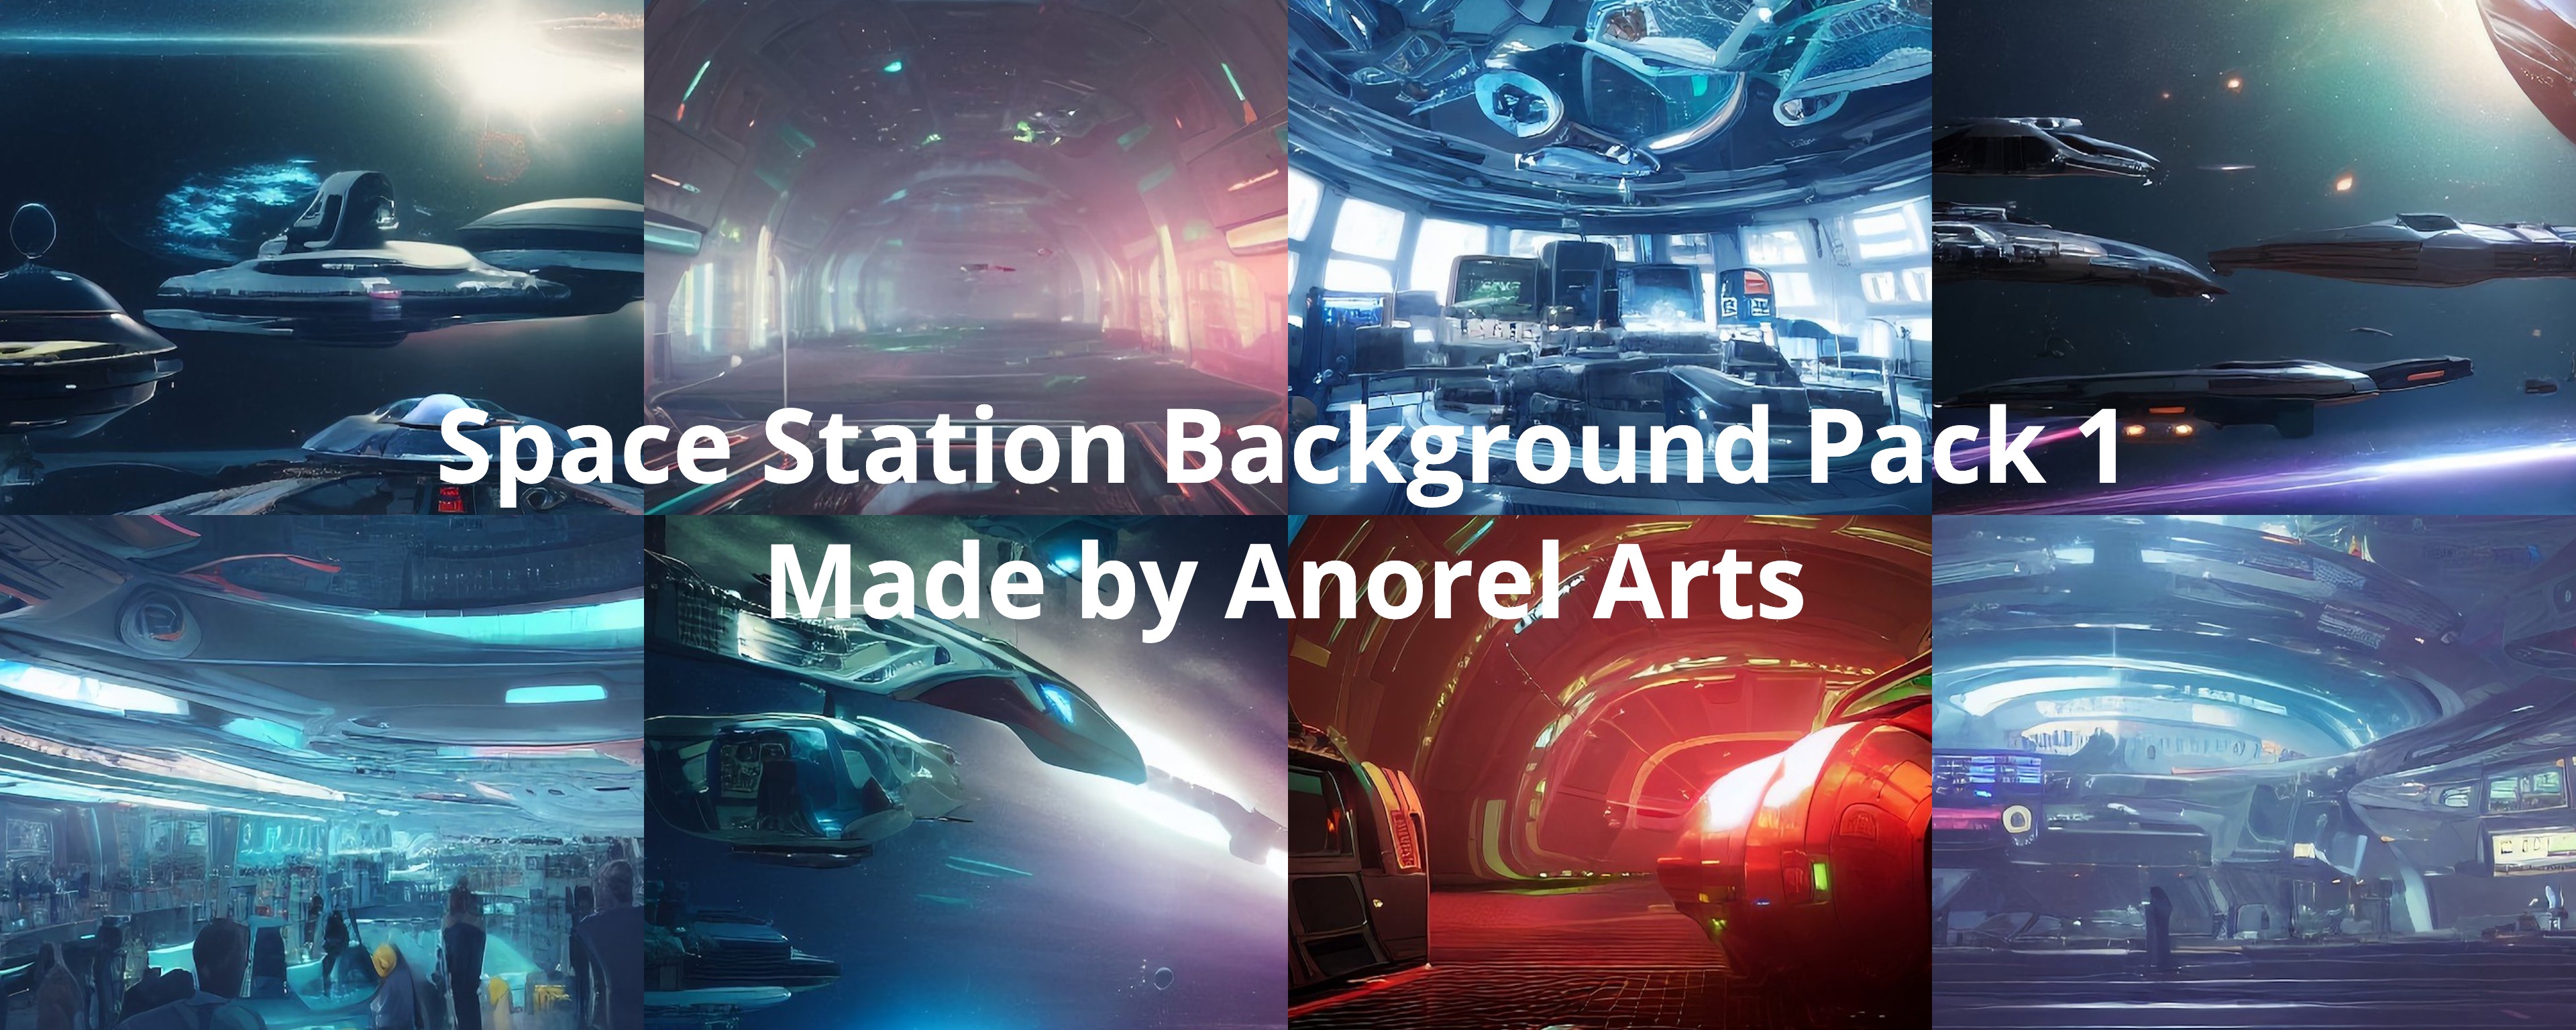 Space Station Background Pack 1